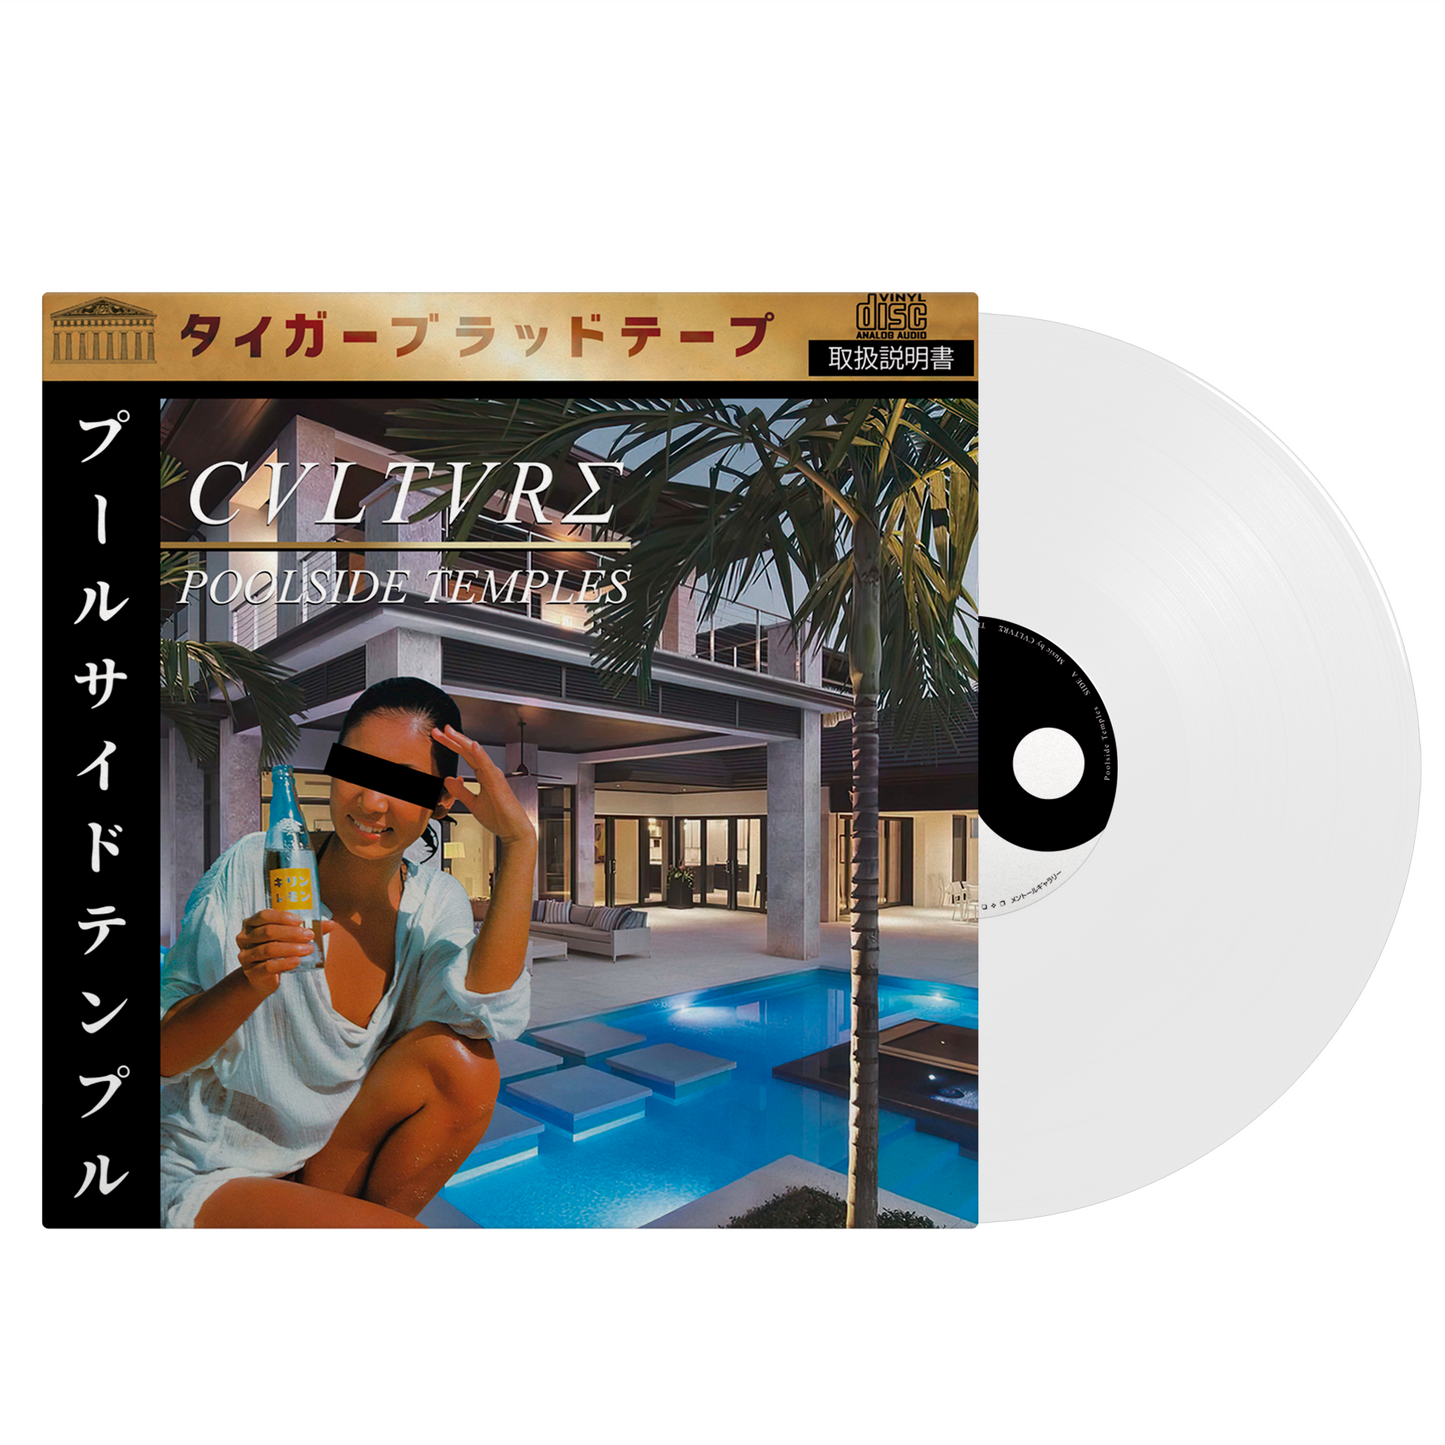 CVLTVRΣ - "Poolside Temples" Bubbly Pool Froth Limited Edition 12" Vinyl LP